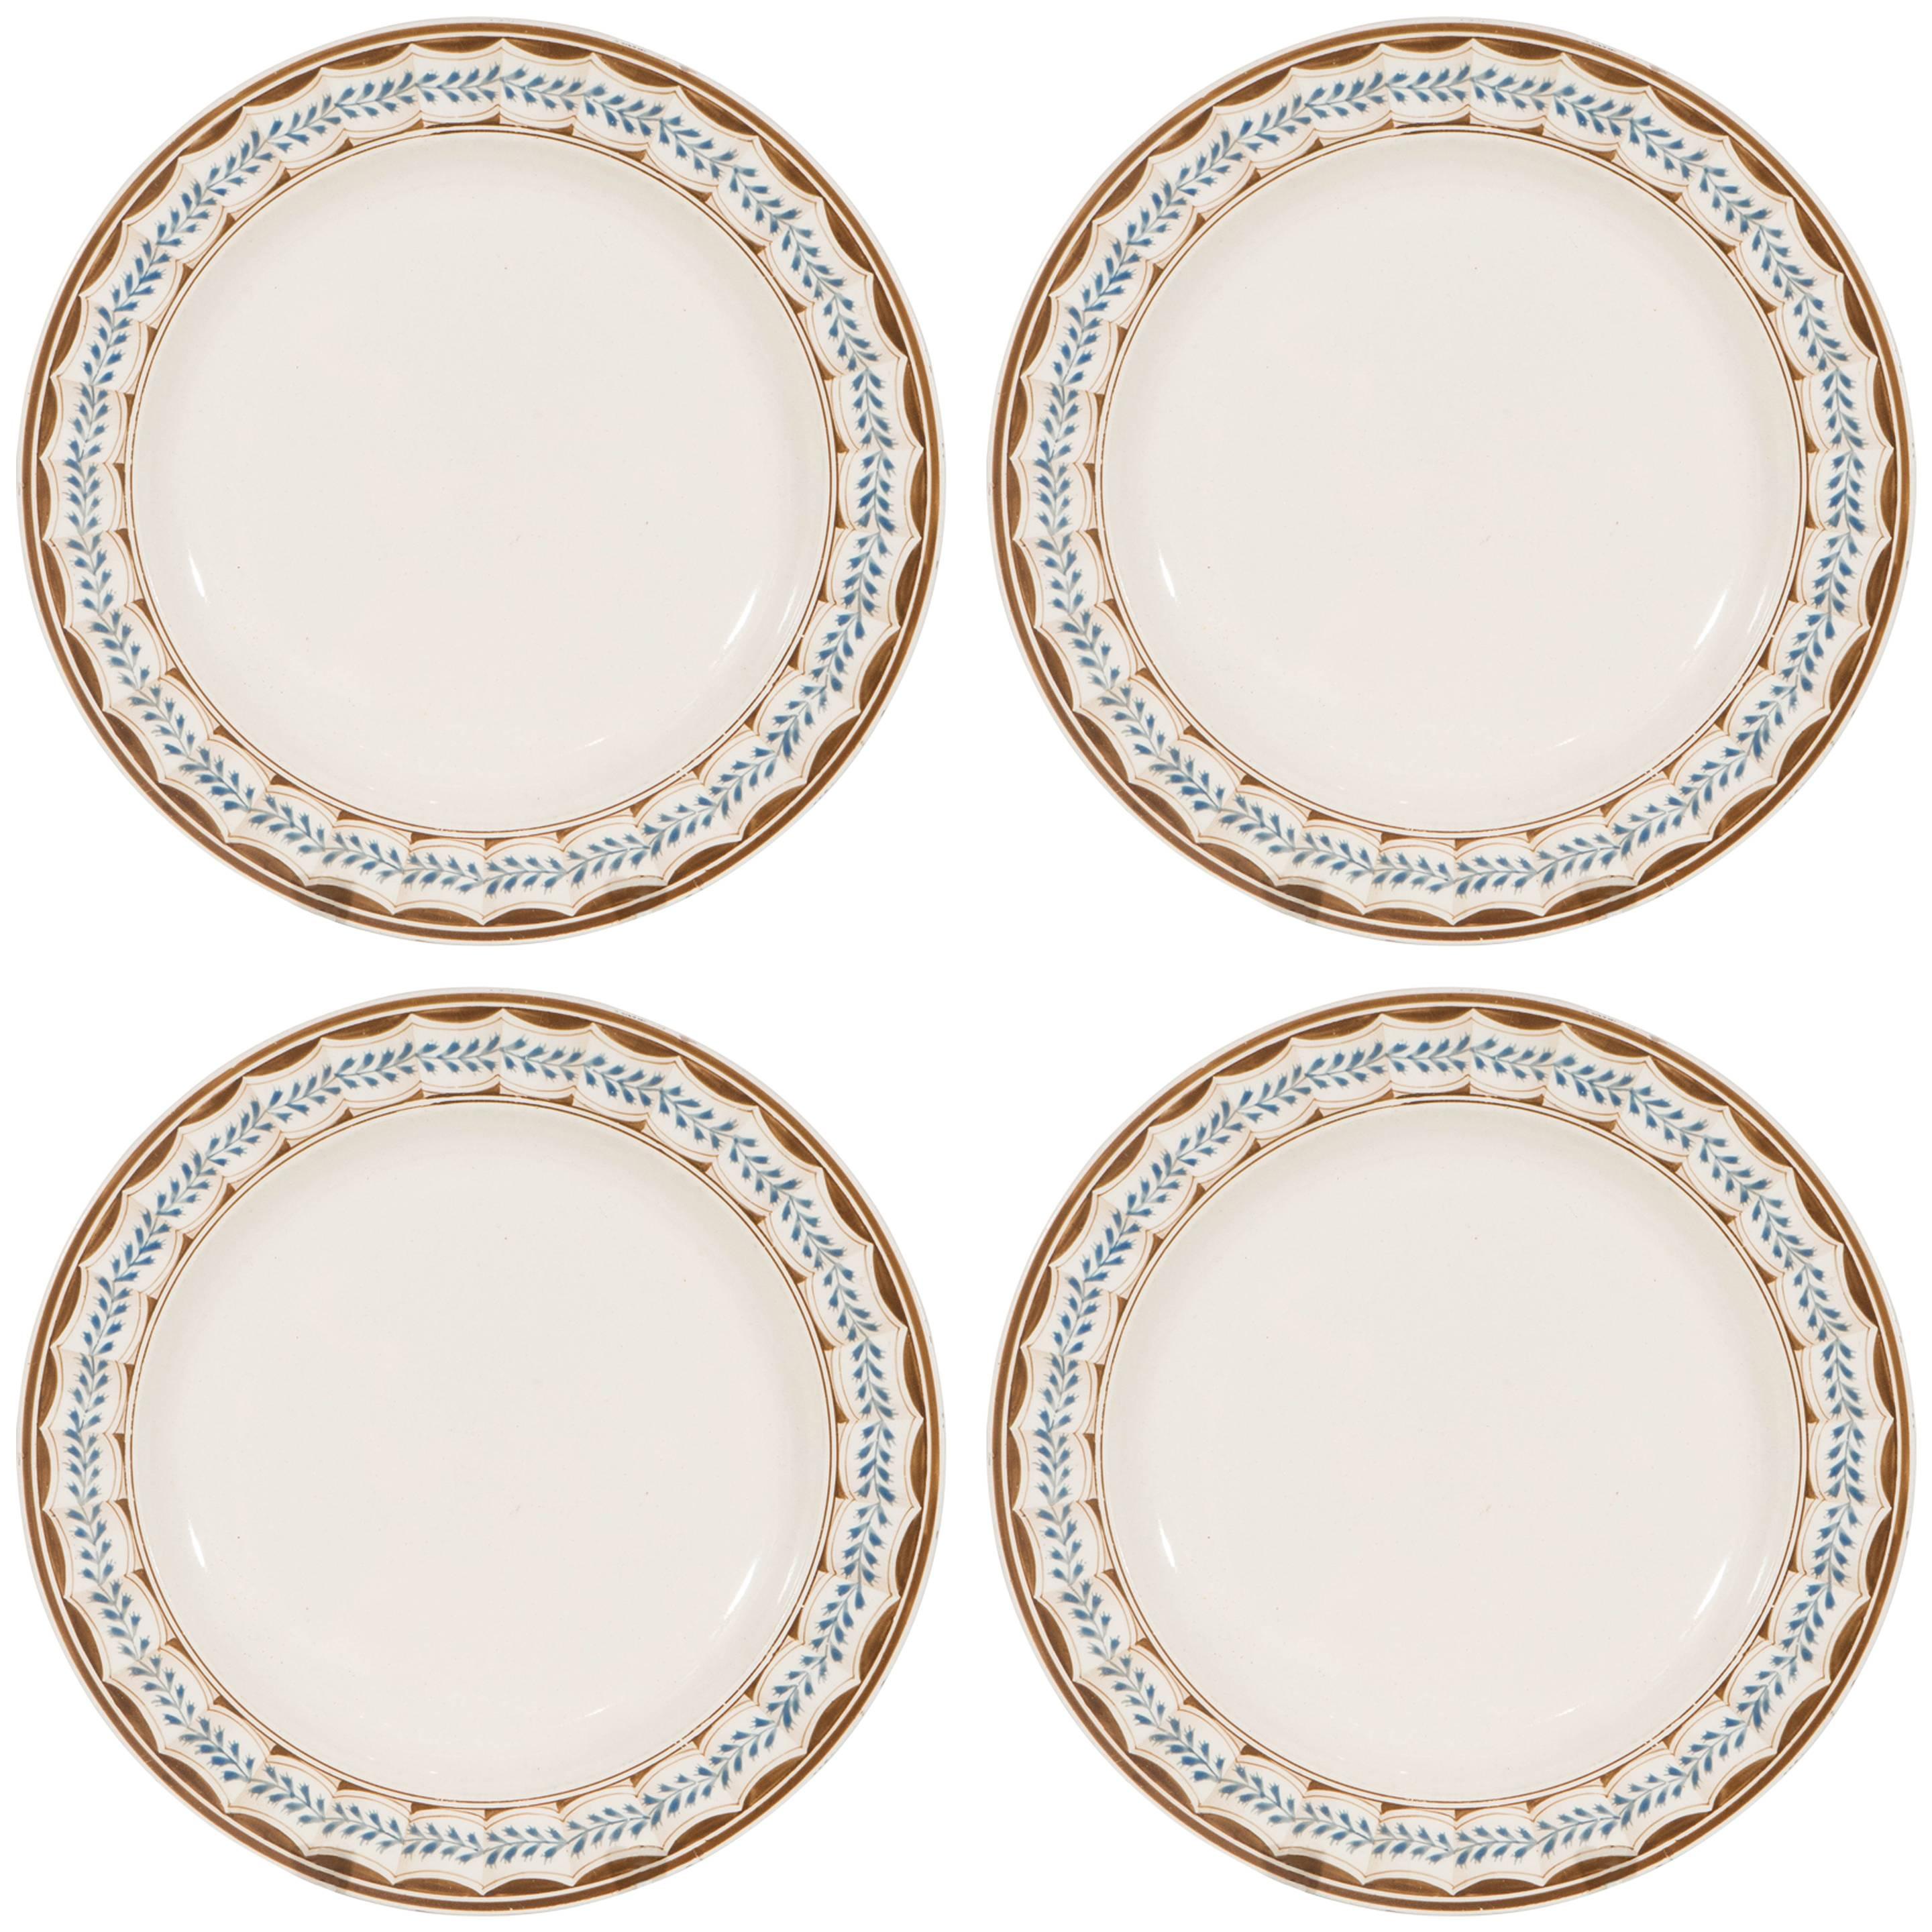 Four Wedgwood Creamware Dishes in the Lag and Feather Pattern